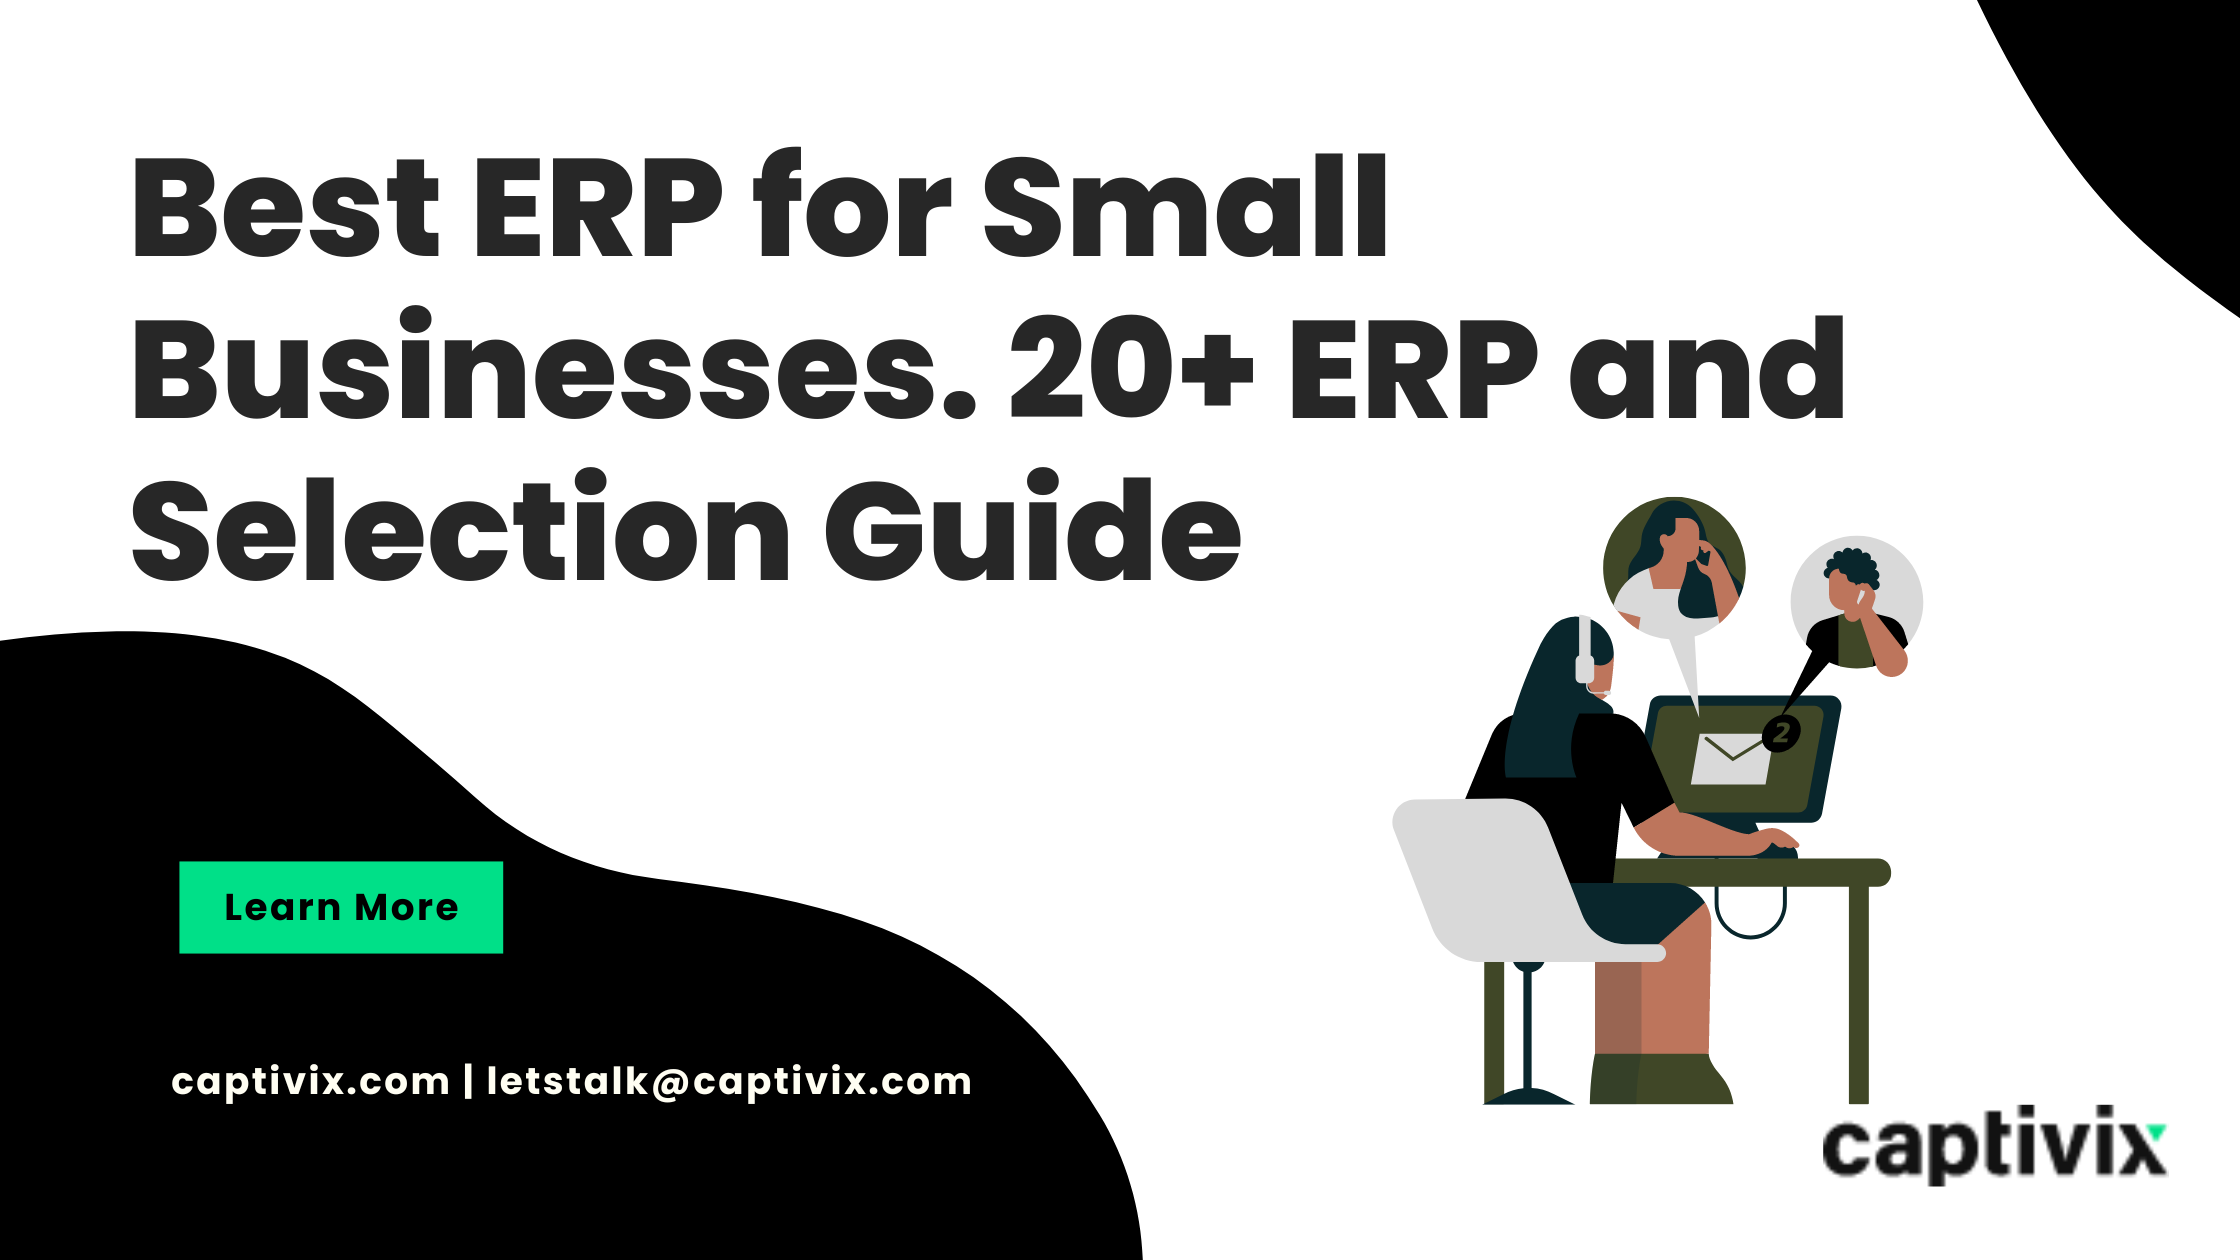 Best ERP for Small Businesses